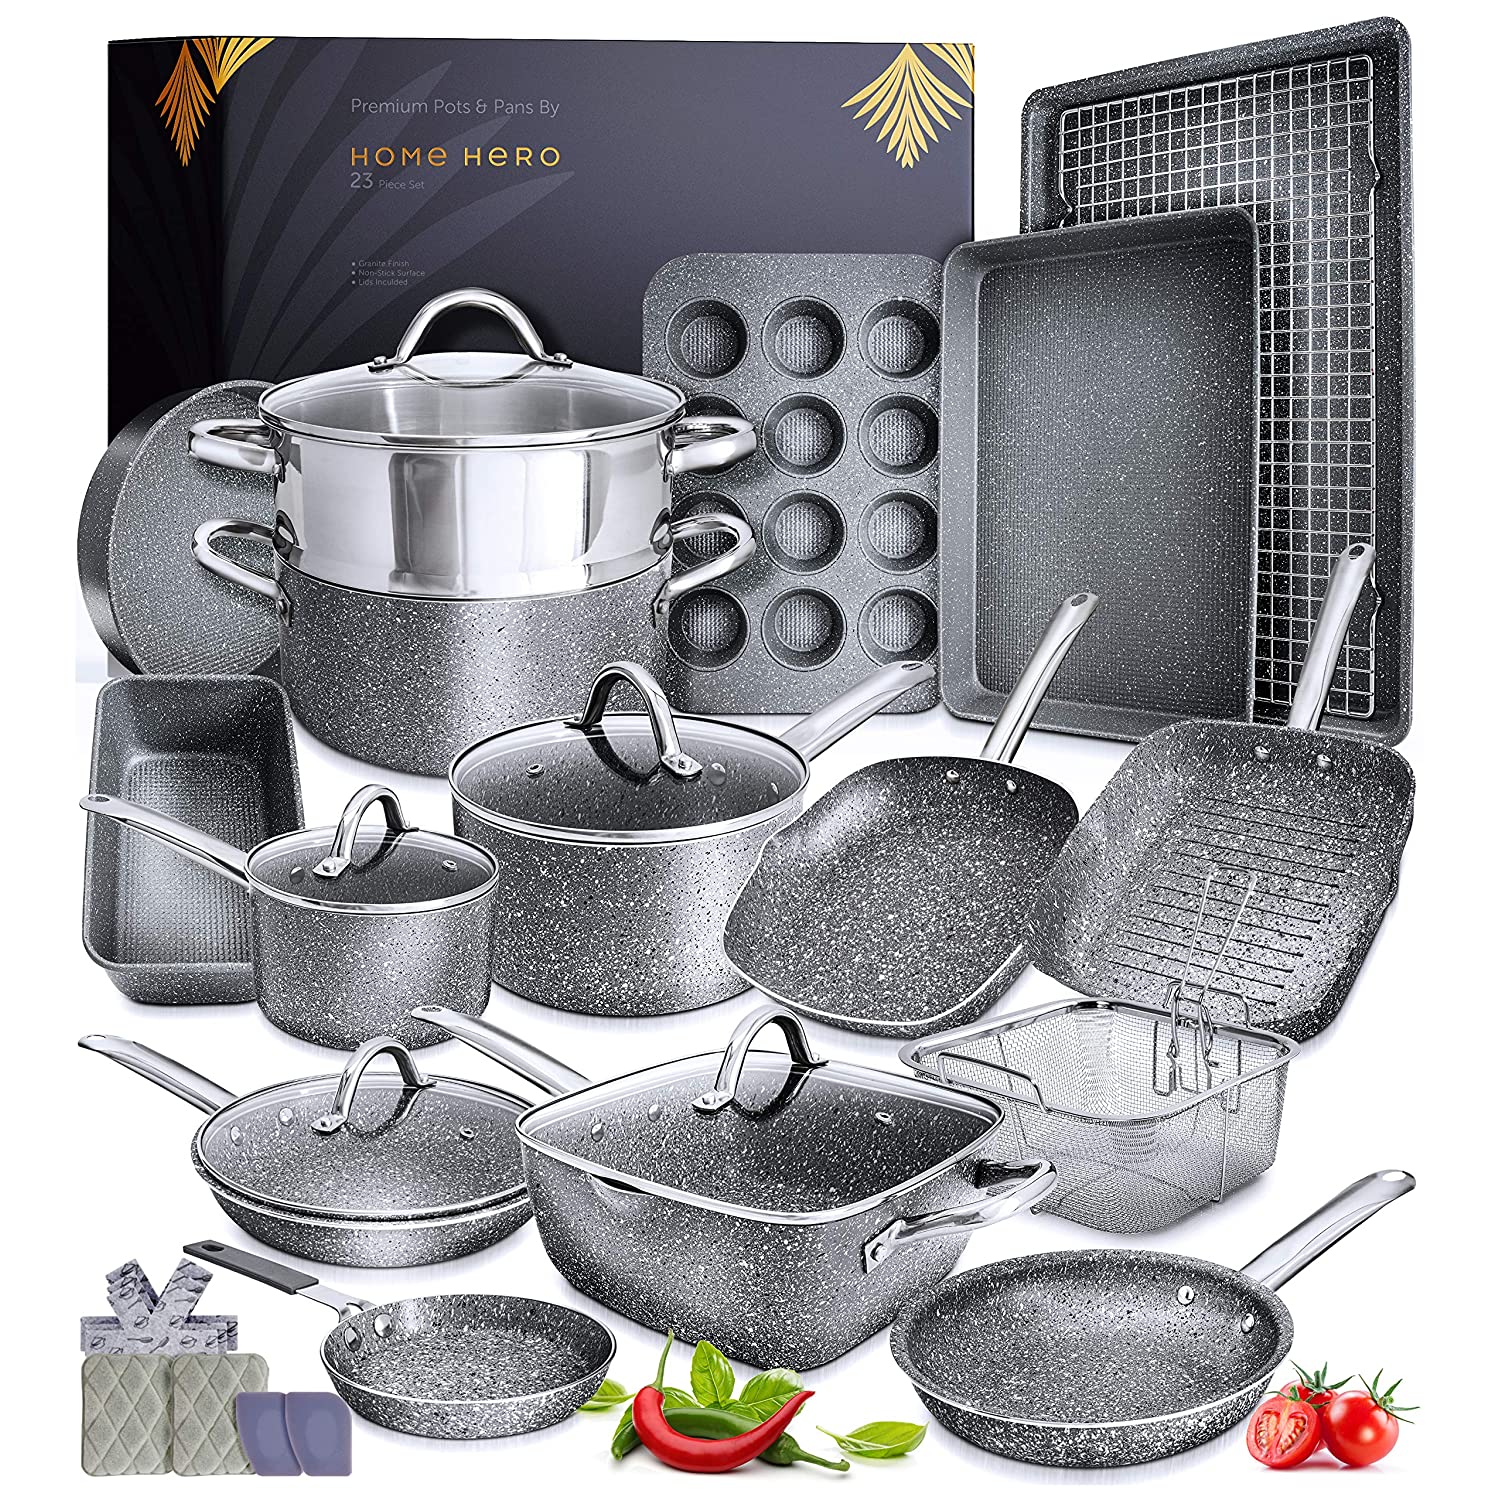 15 Piece Nonstick Induction Cooking Kitchen Cookware Sets Granite